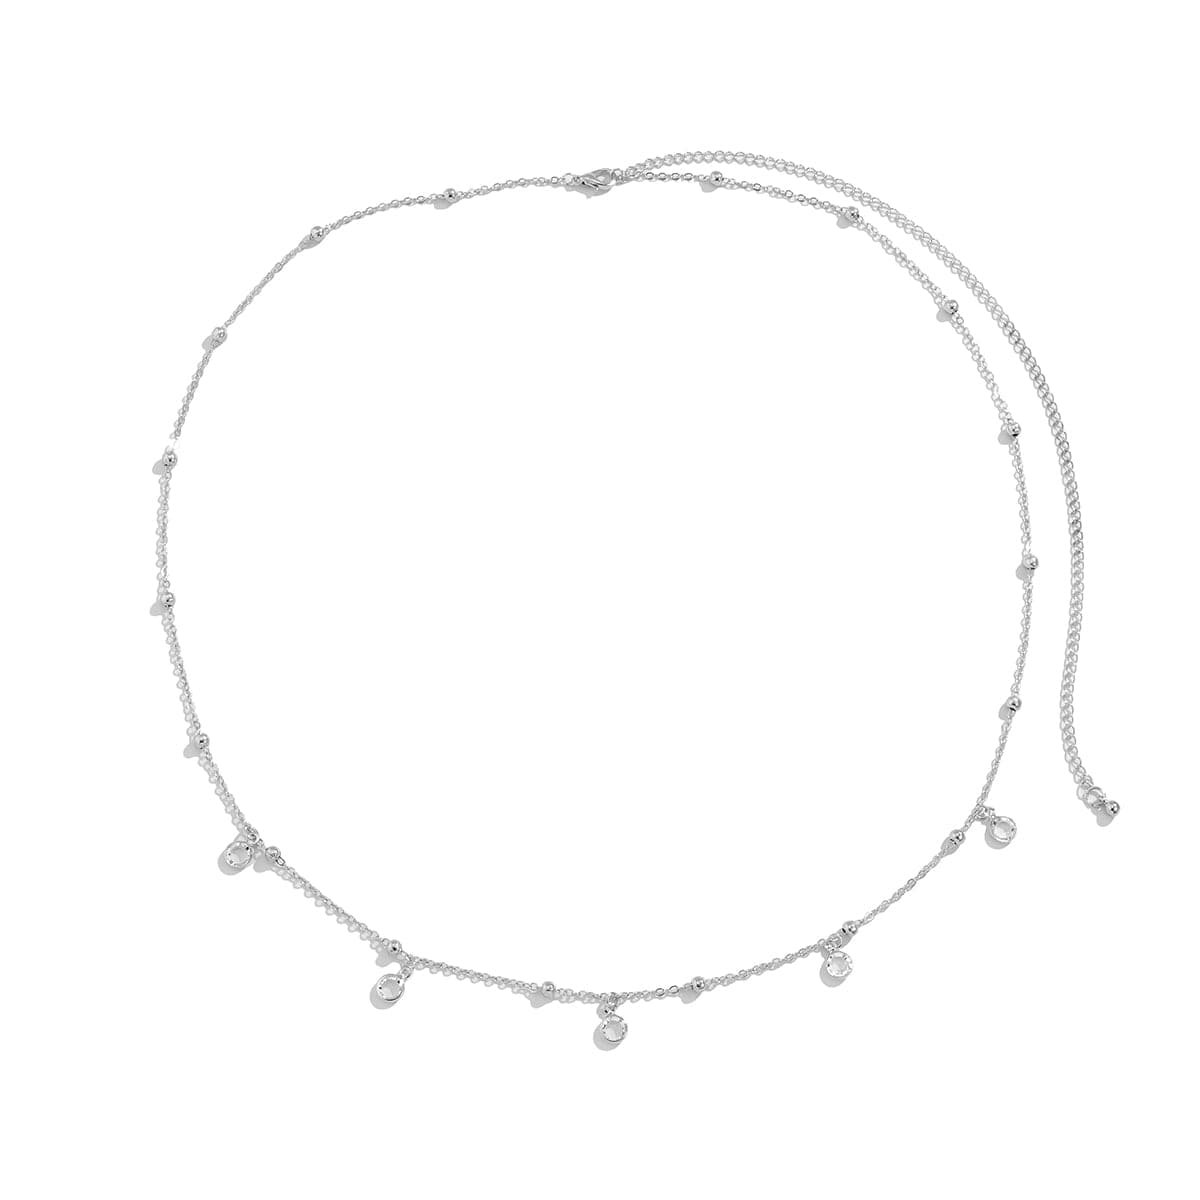 Cubic Zirconia & Silver-Plated Bead Waist Chain